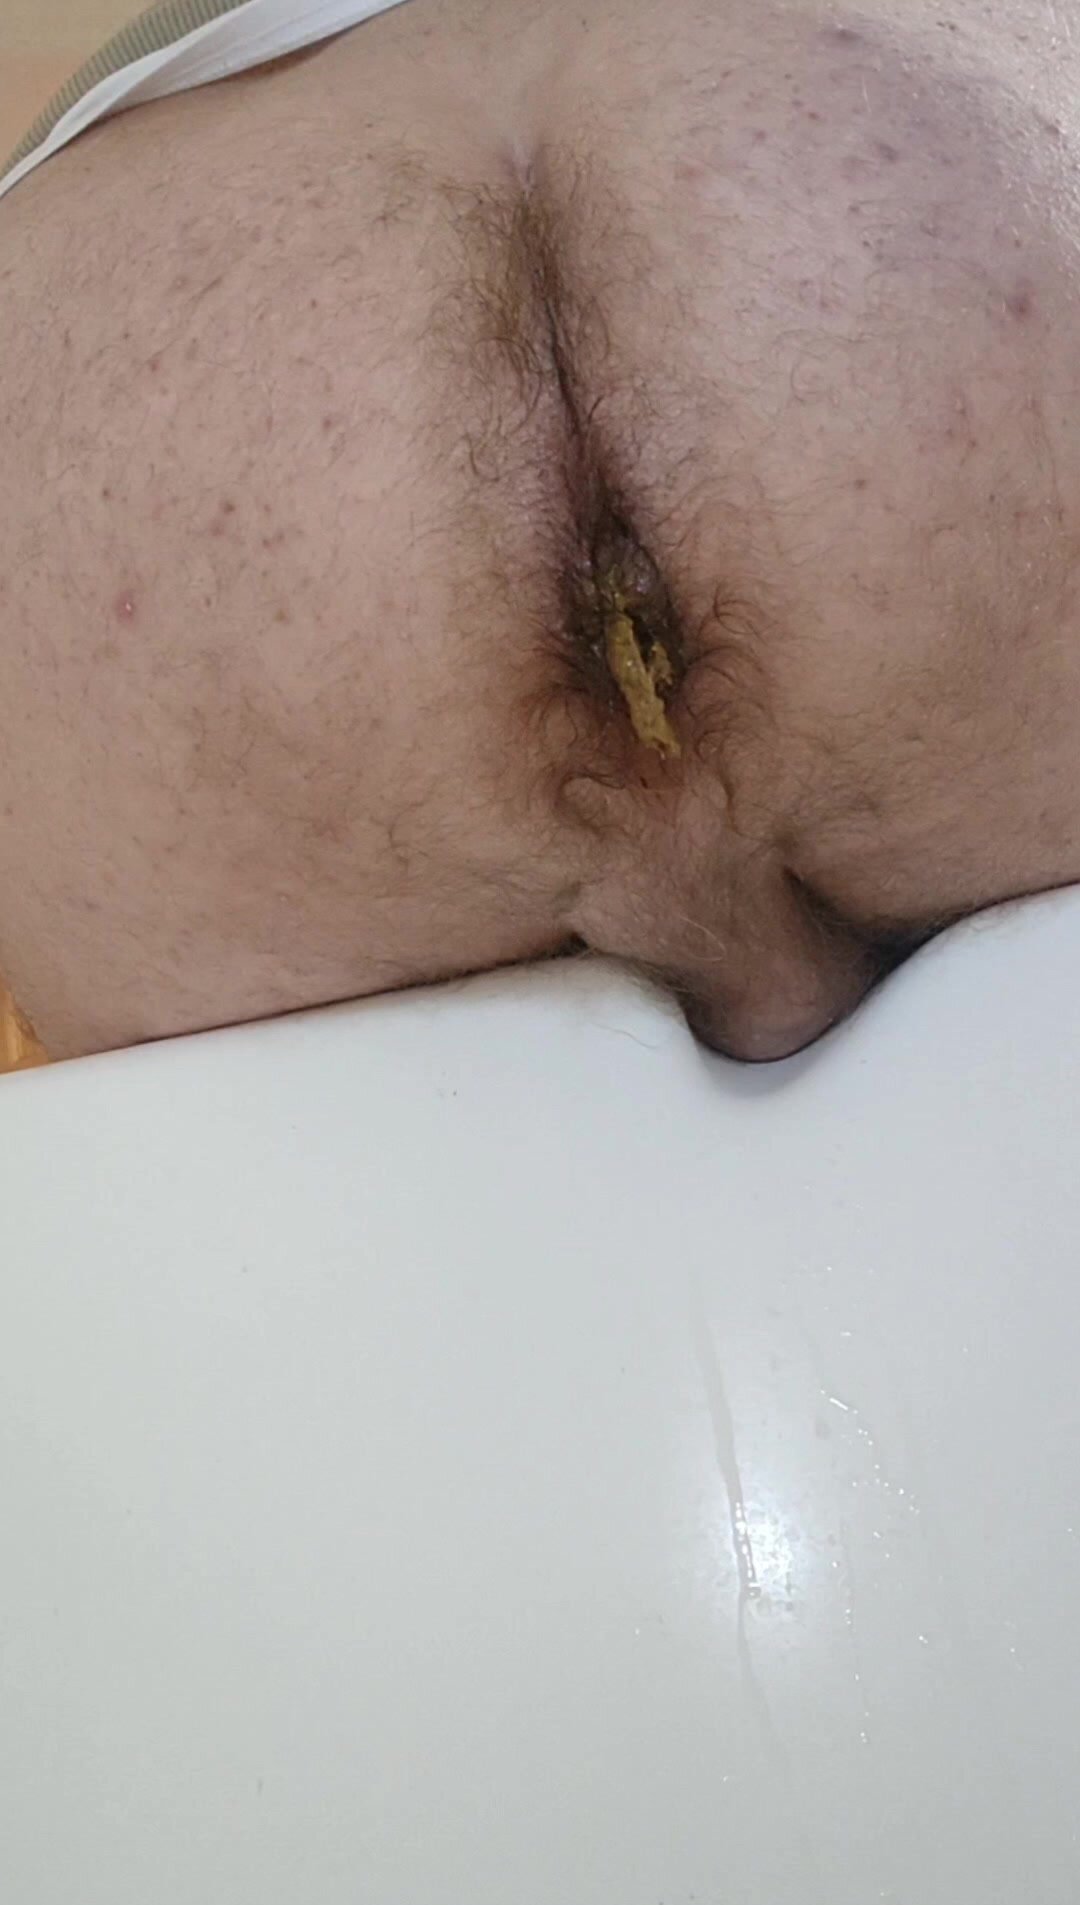 Poop in the bathtub at a friend's house